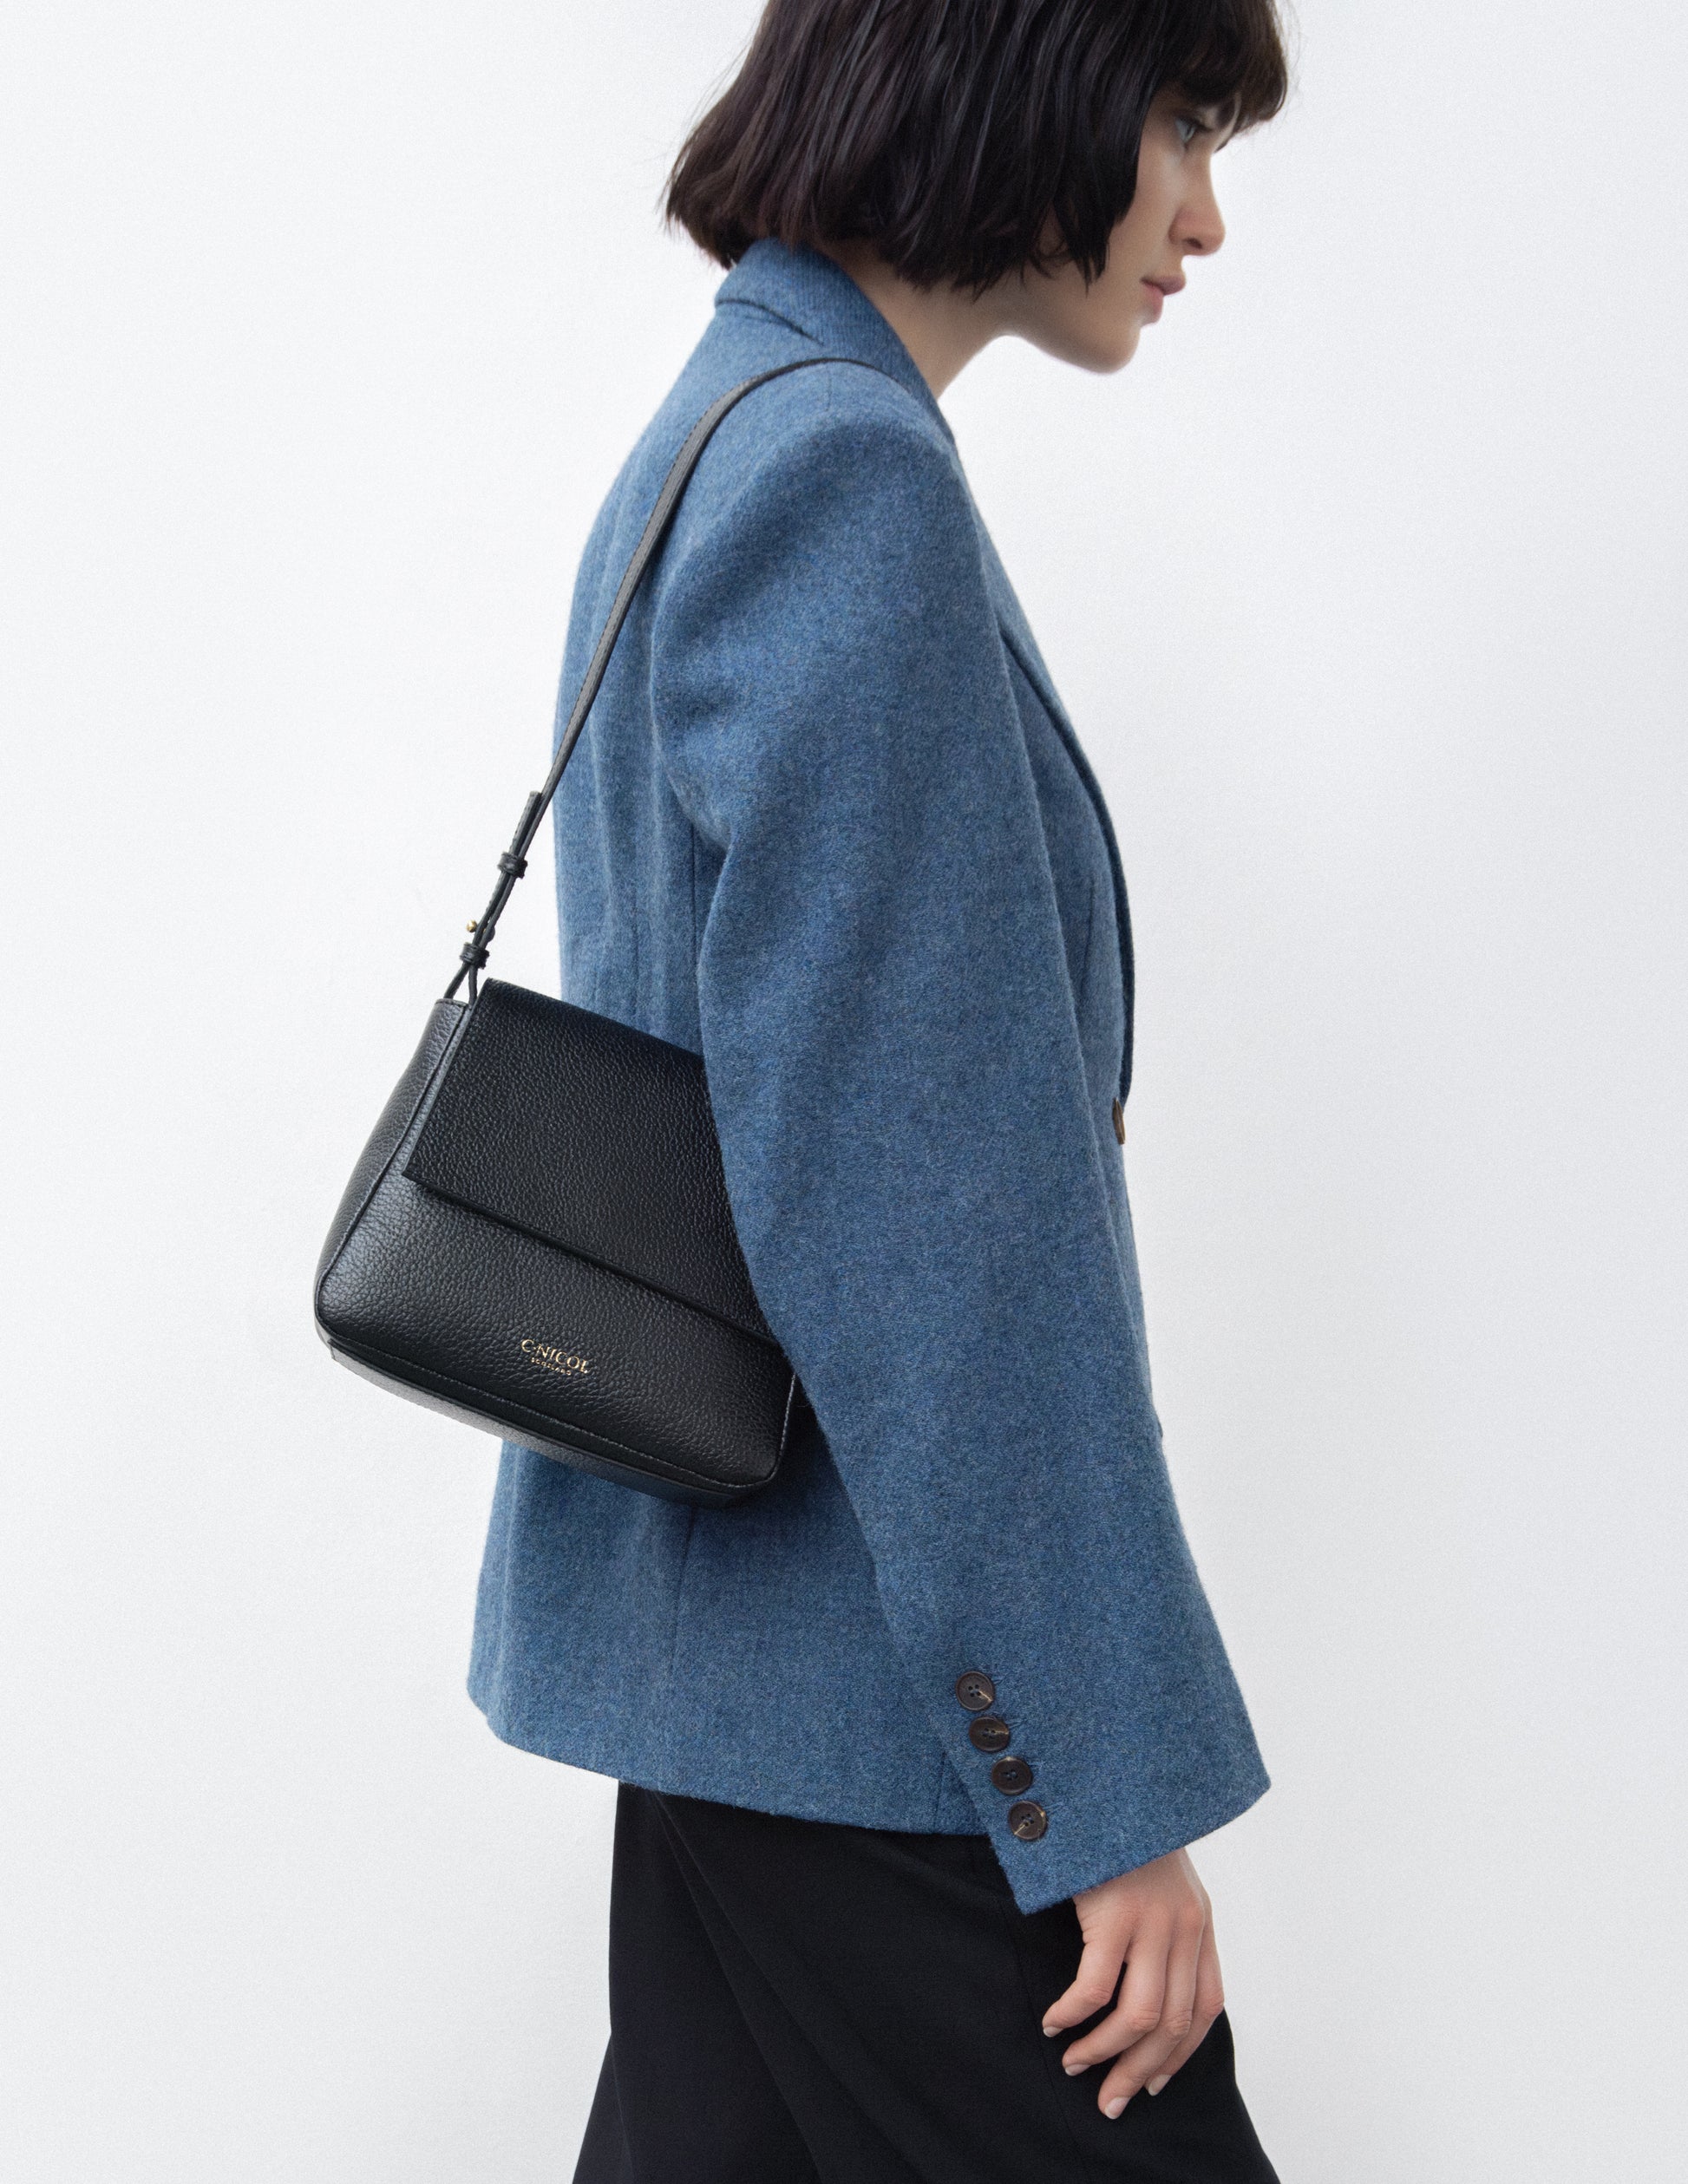 CNicol Black Leather Bag worn by model facing sideways in a blue blazer and black trousers